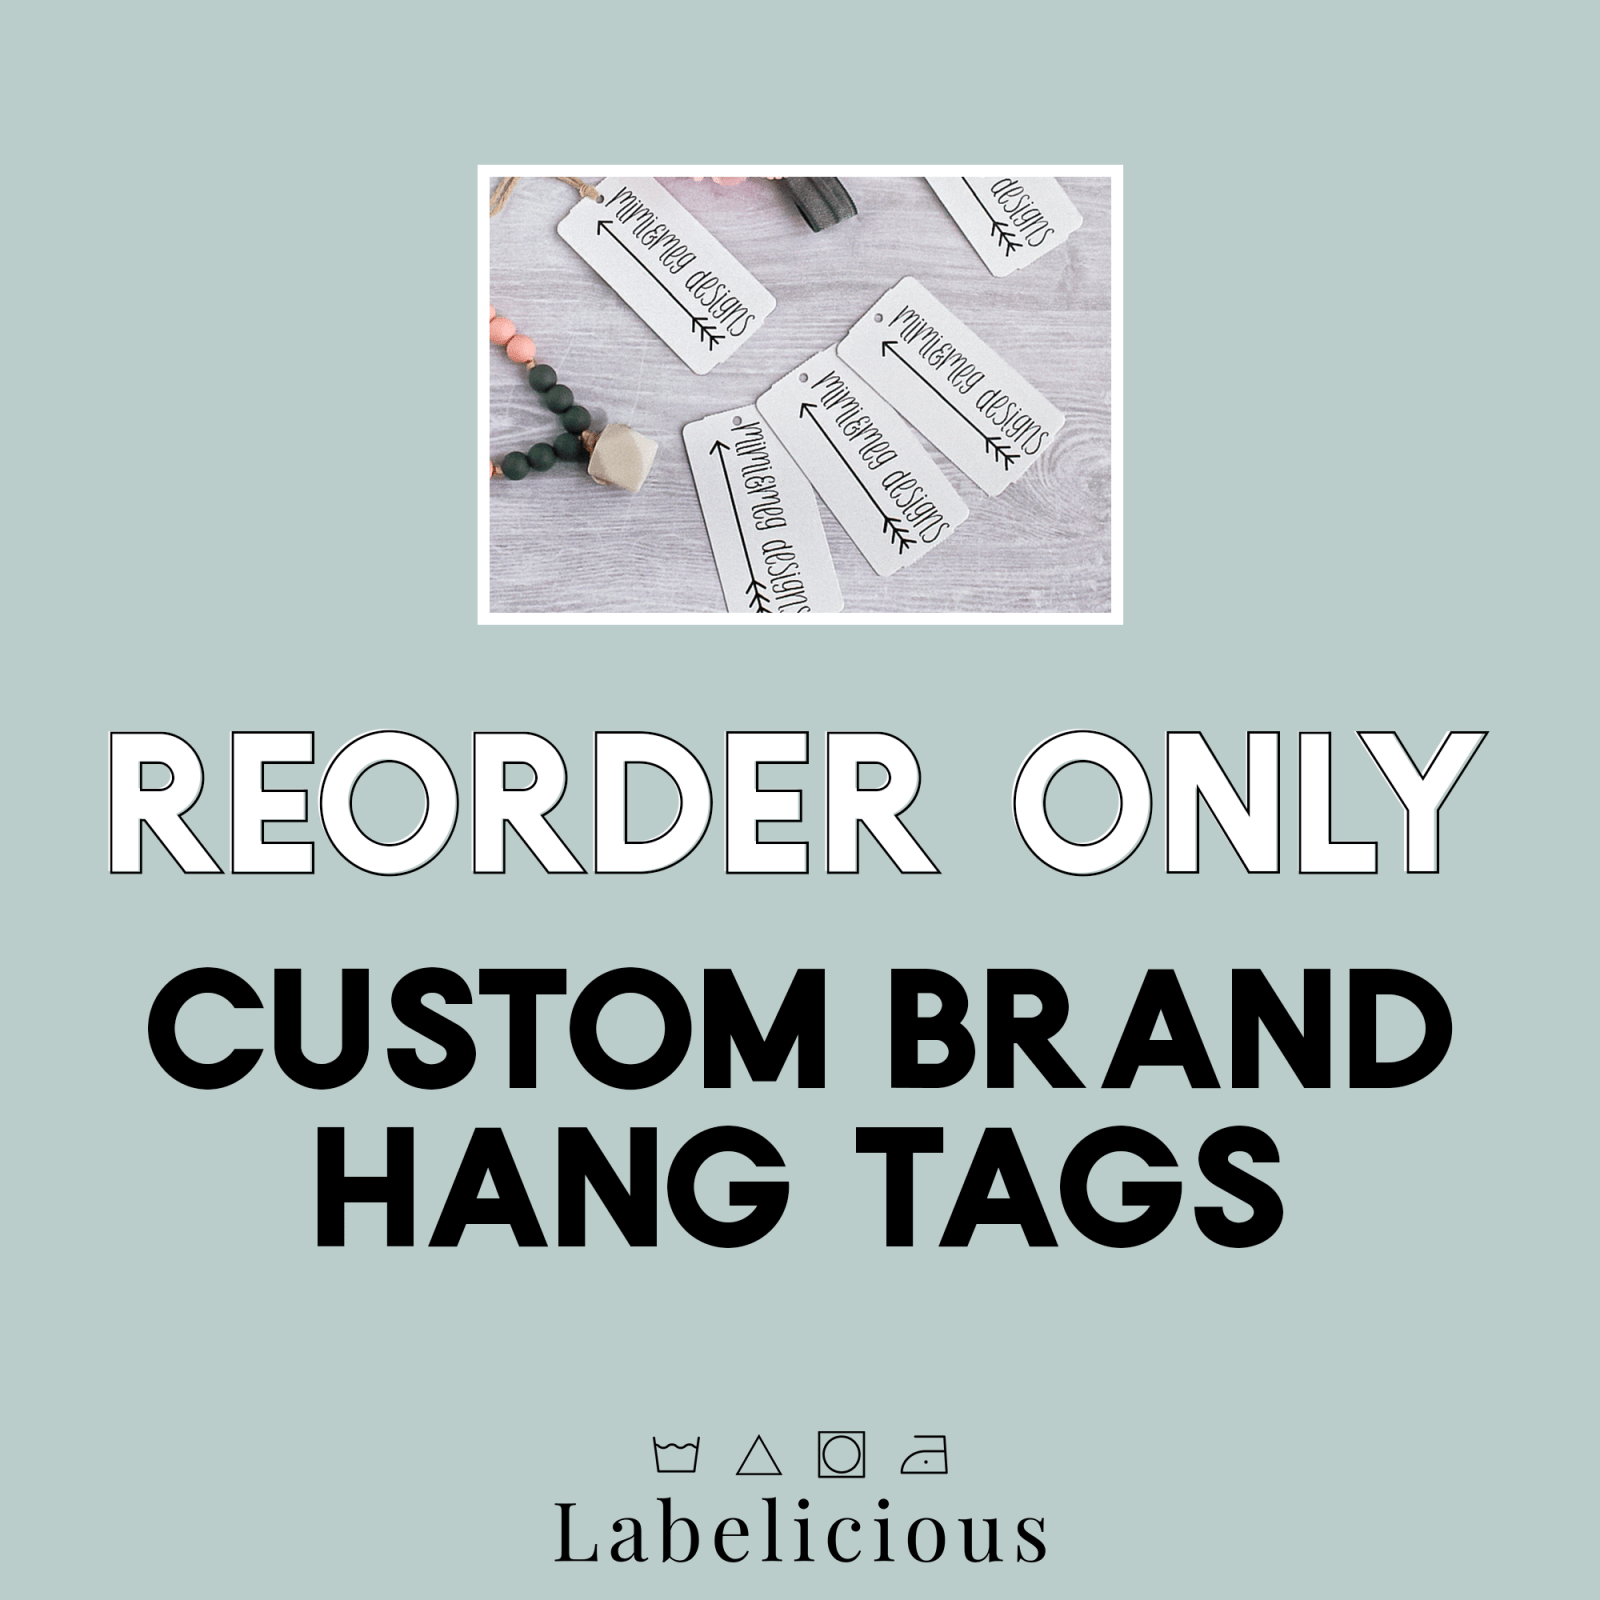 re-order-only-brandlogo-hang-tags-912550.png